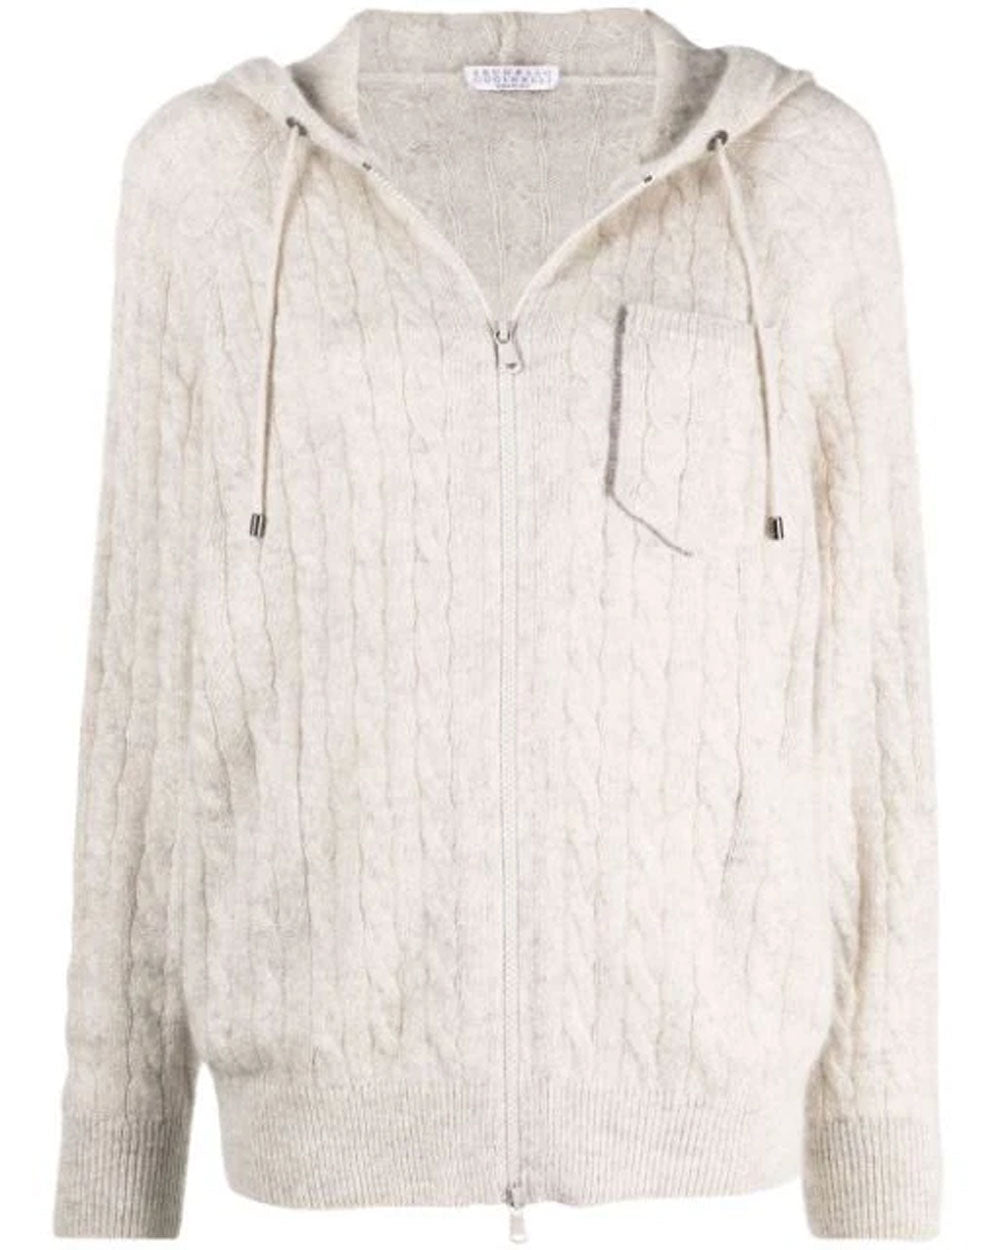 Gravel Sparkling Cable Knit Zipped Cardigan